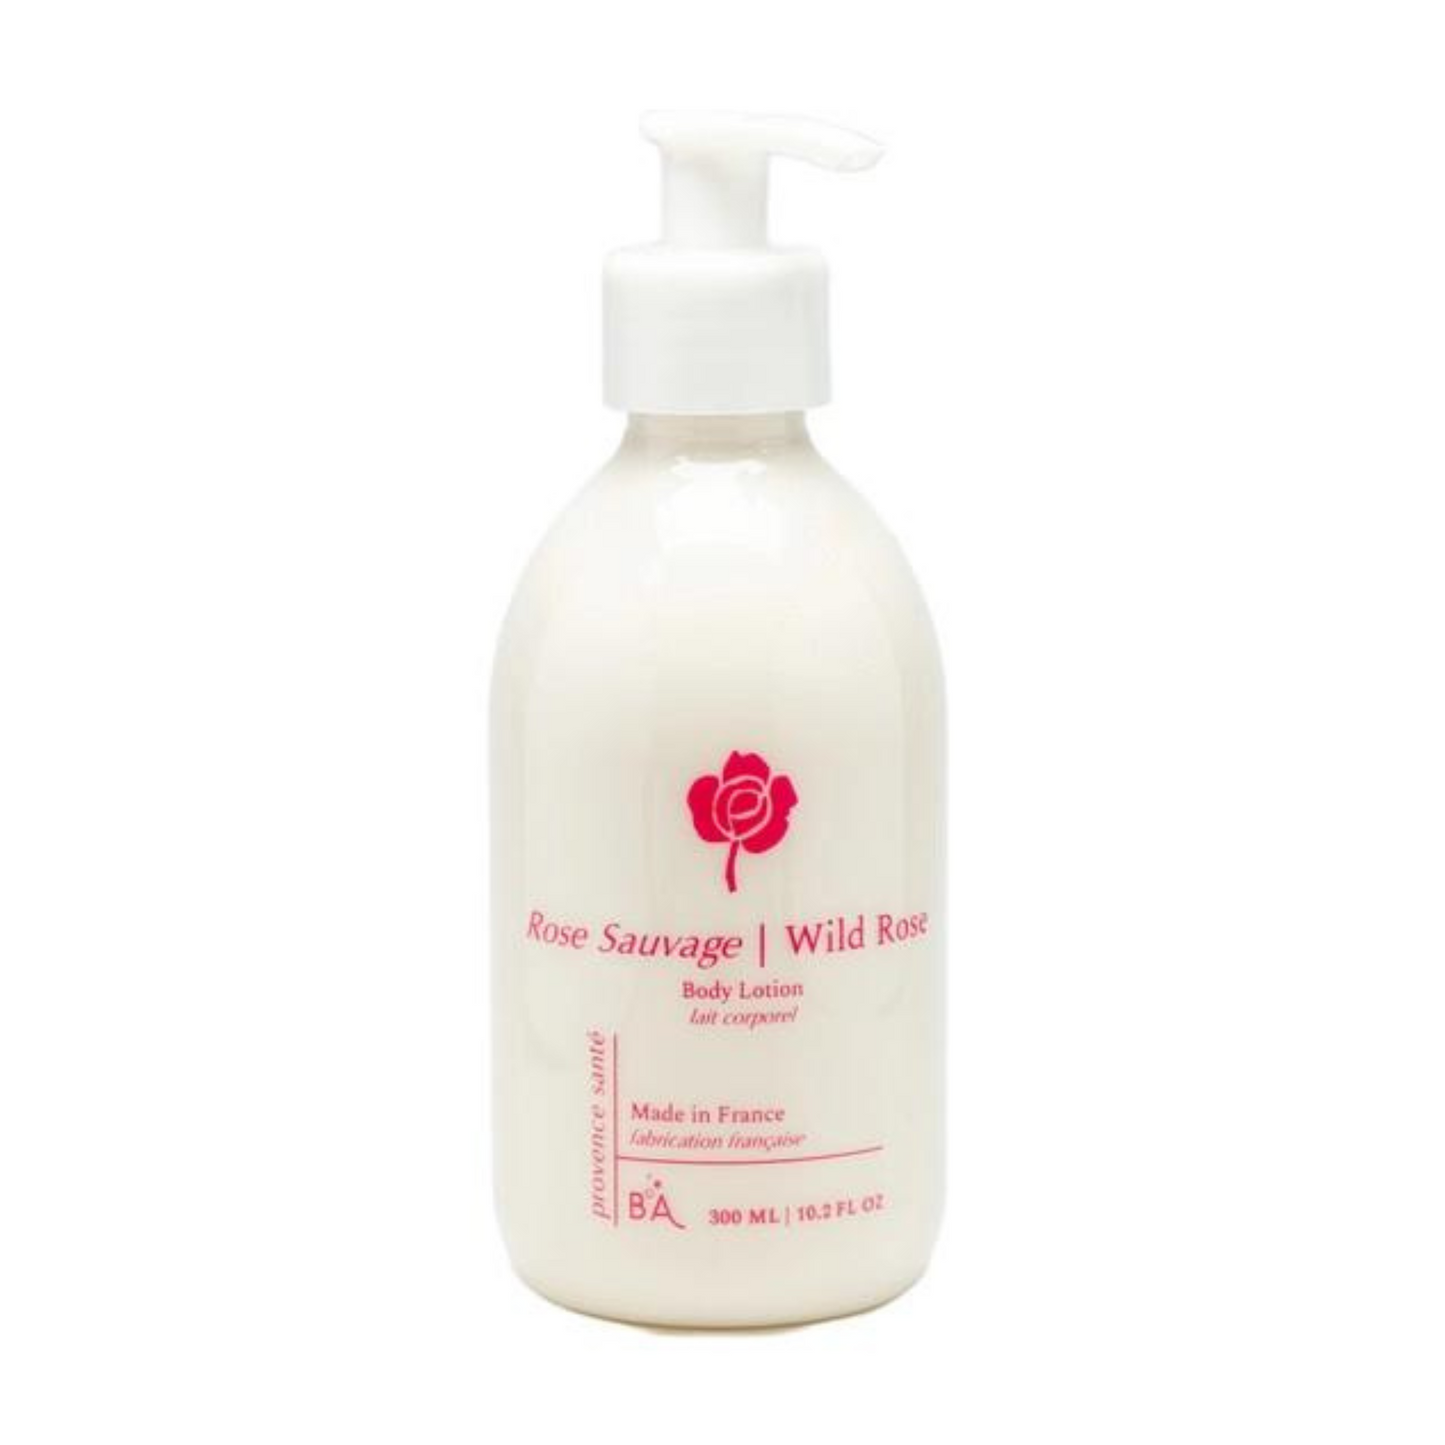 Primary Image of Provence Sante Wild Rose Body Lotion (10.2 oz) 